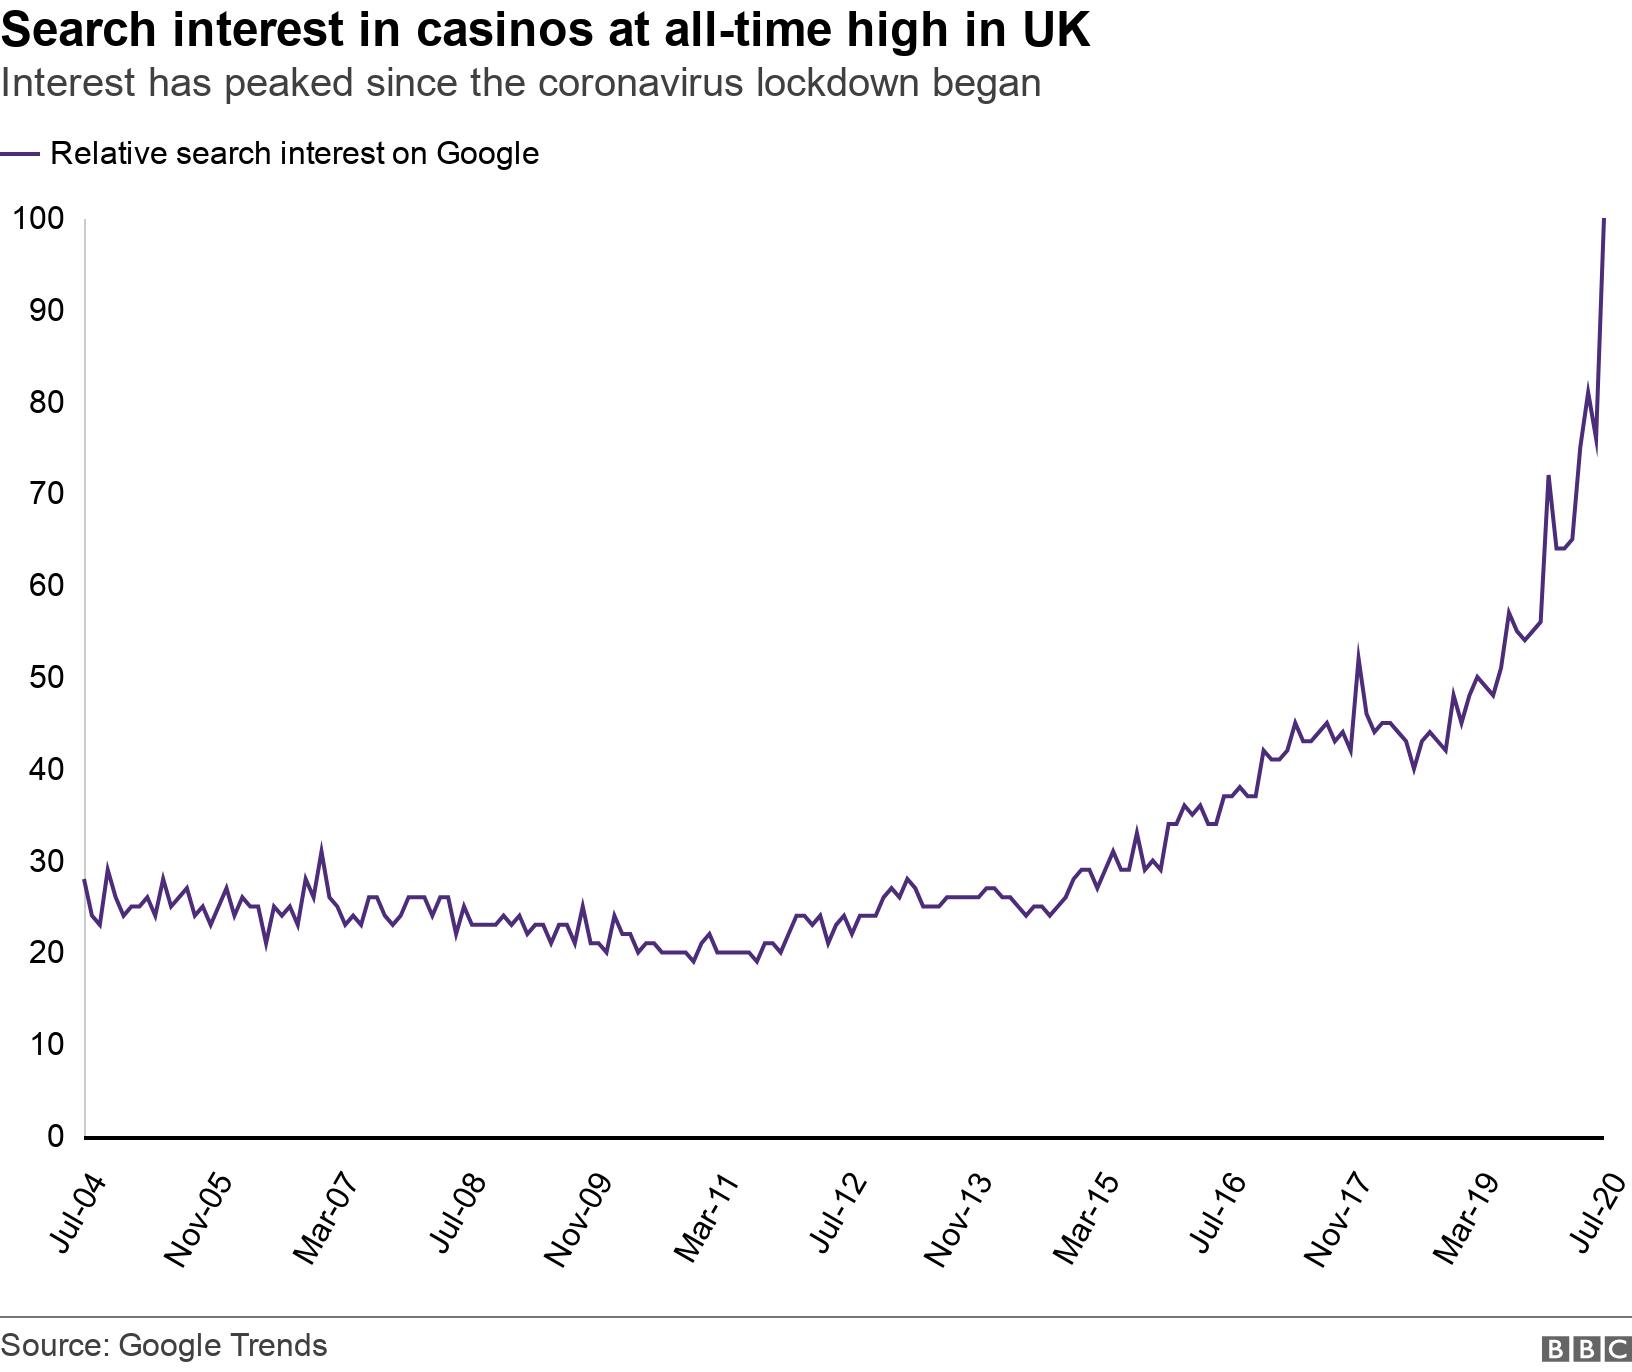 Search interest in casinos at all-time high in UK. Interest has peaked since the coronavirus lockdown began. A line chart showing the relative popularity of casinos and related topics in Google searches has reached an all-time high for the UK since the search engine&#39;s records began in 2004. .